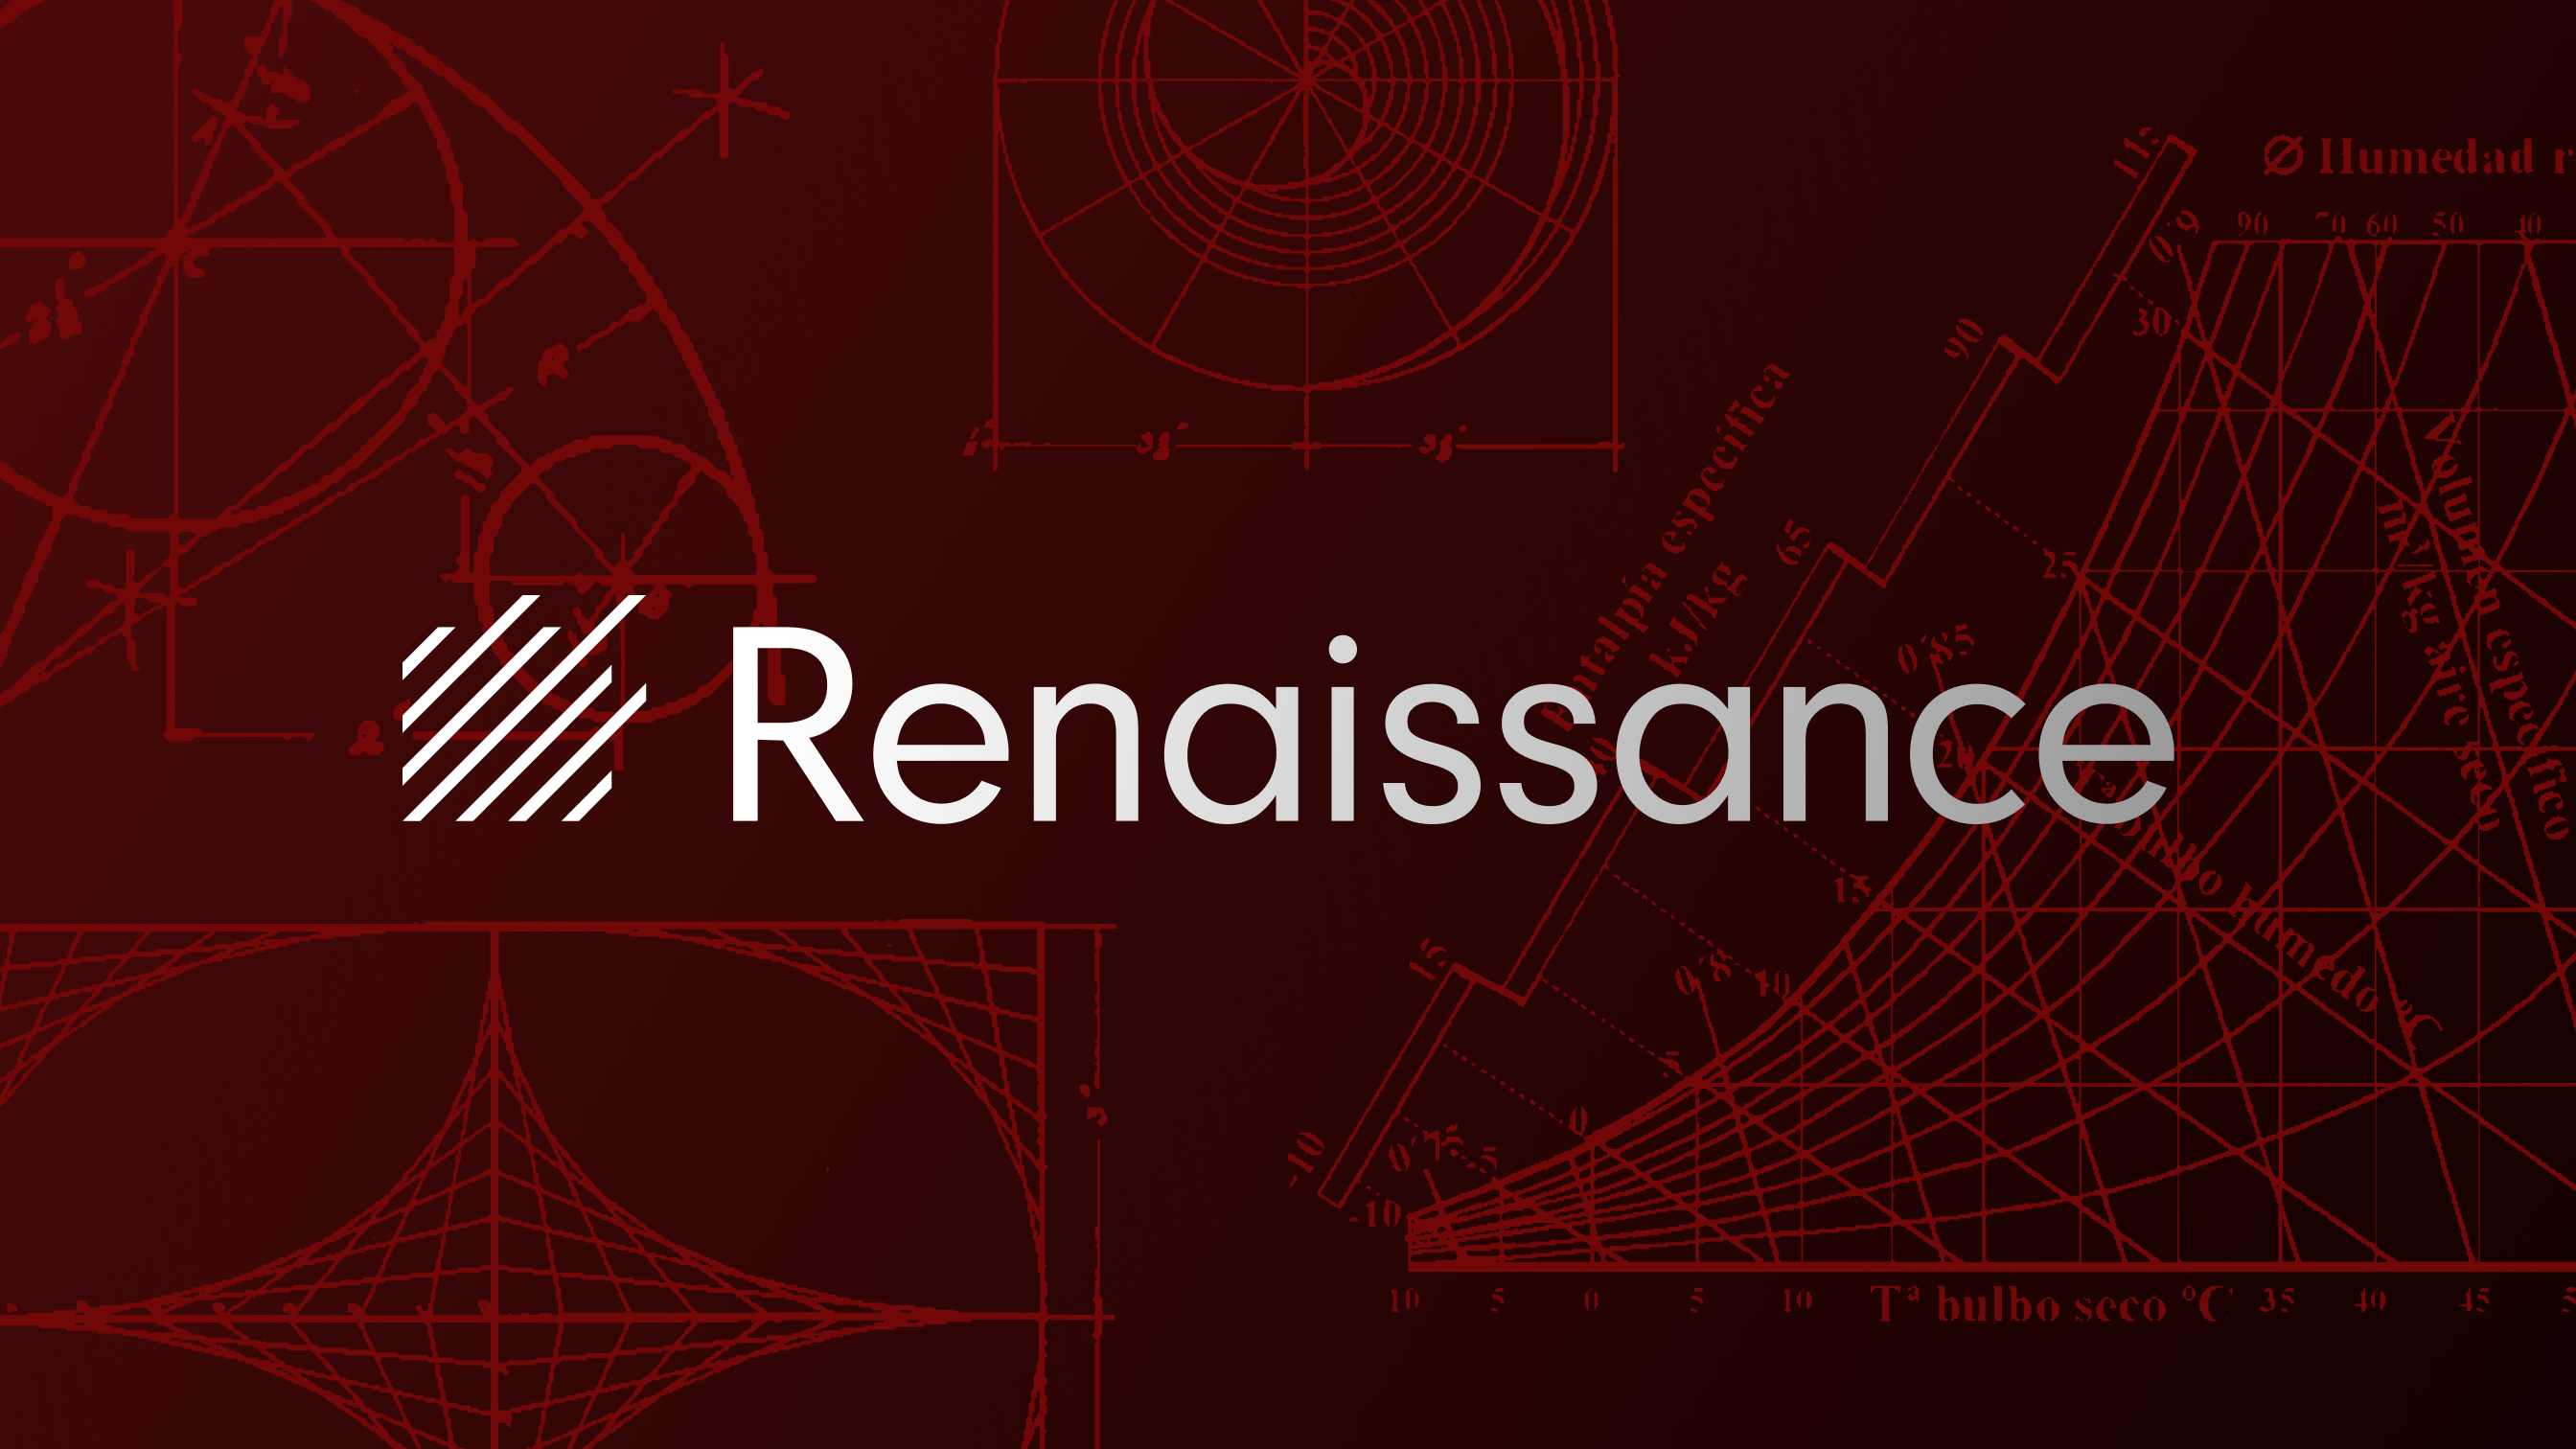 The Legendary Performance of Renaissance Technologies and The Medallion Fund